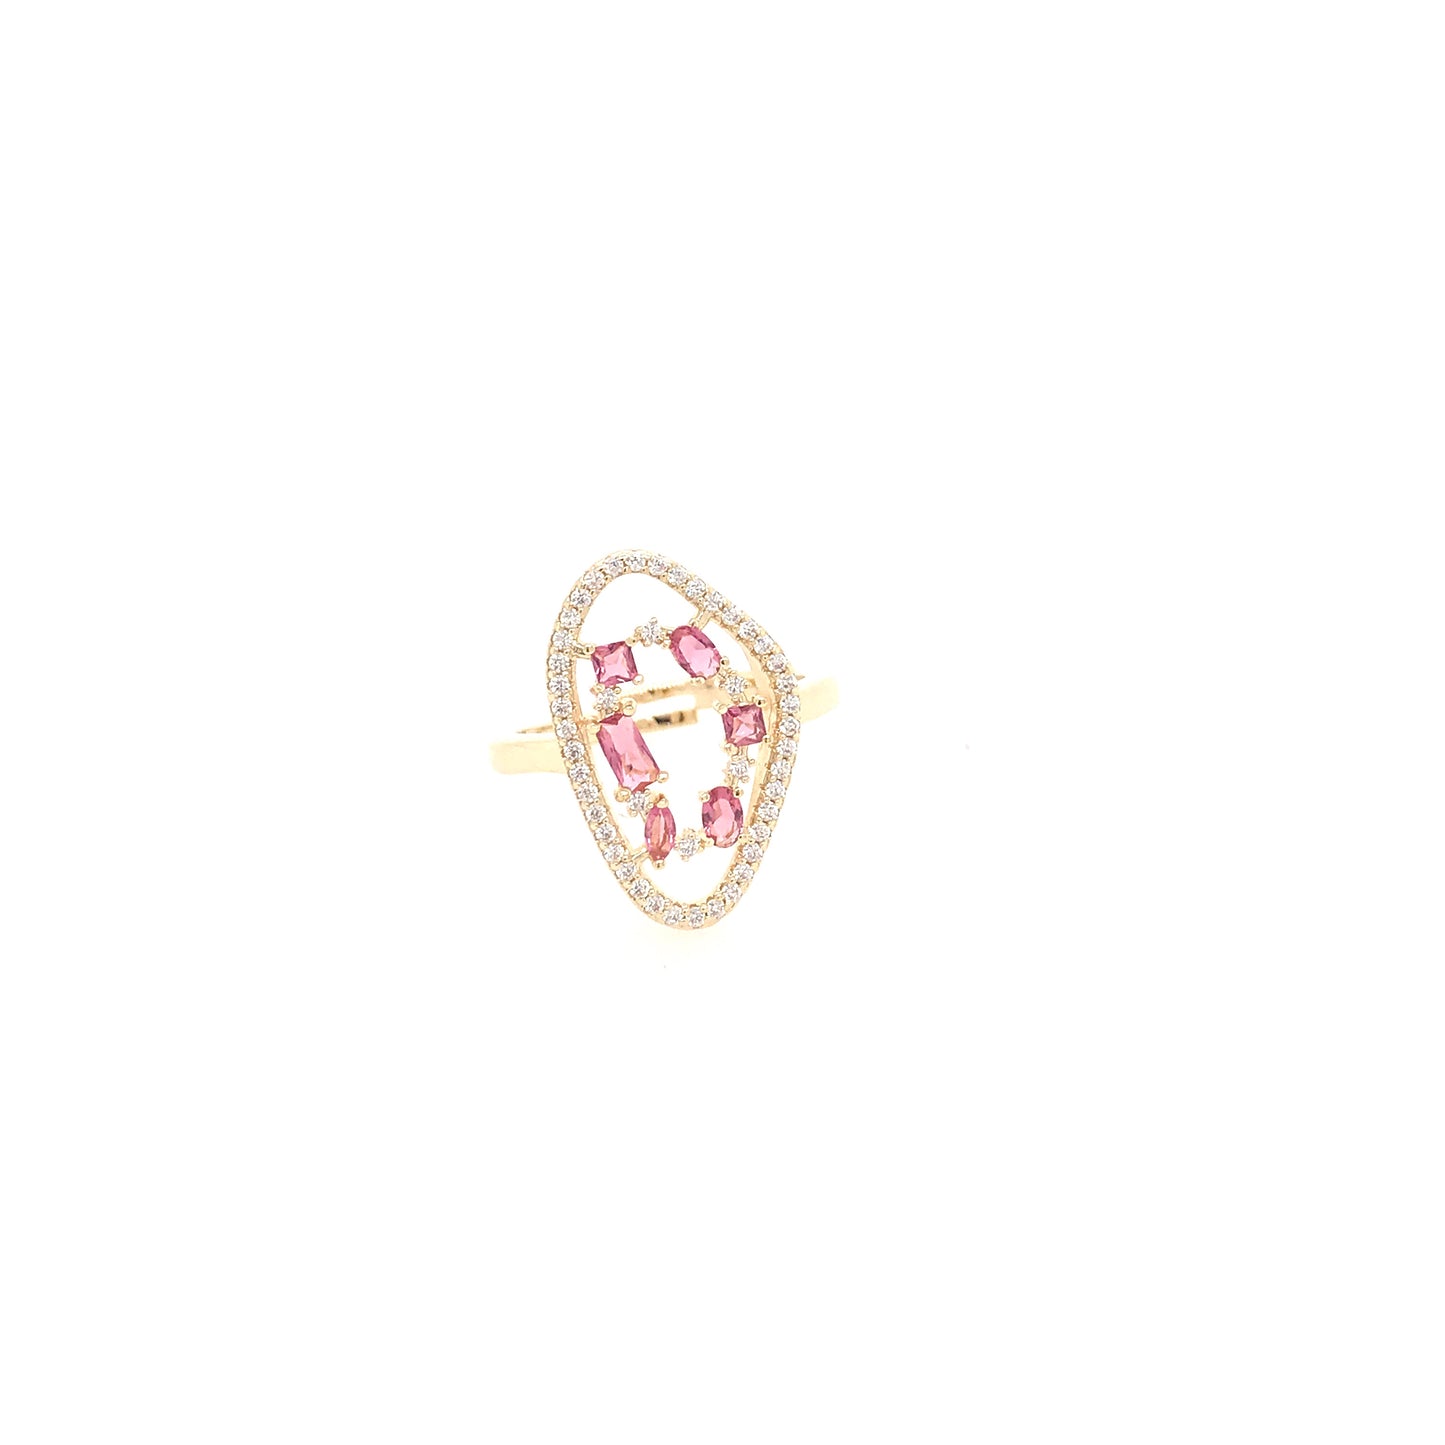 Gold Plated Ring In Natural Stone Shape With Micropave Stones - HK Jewels